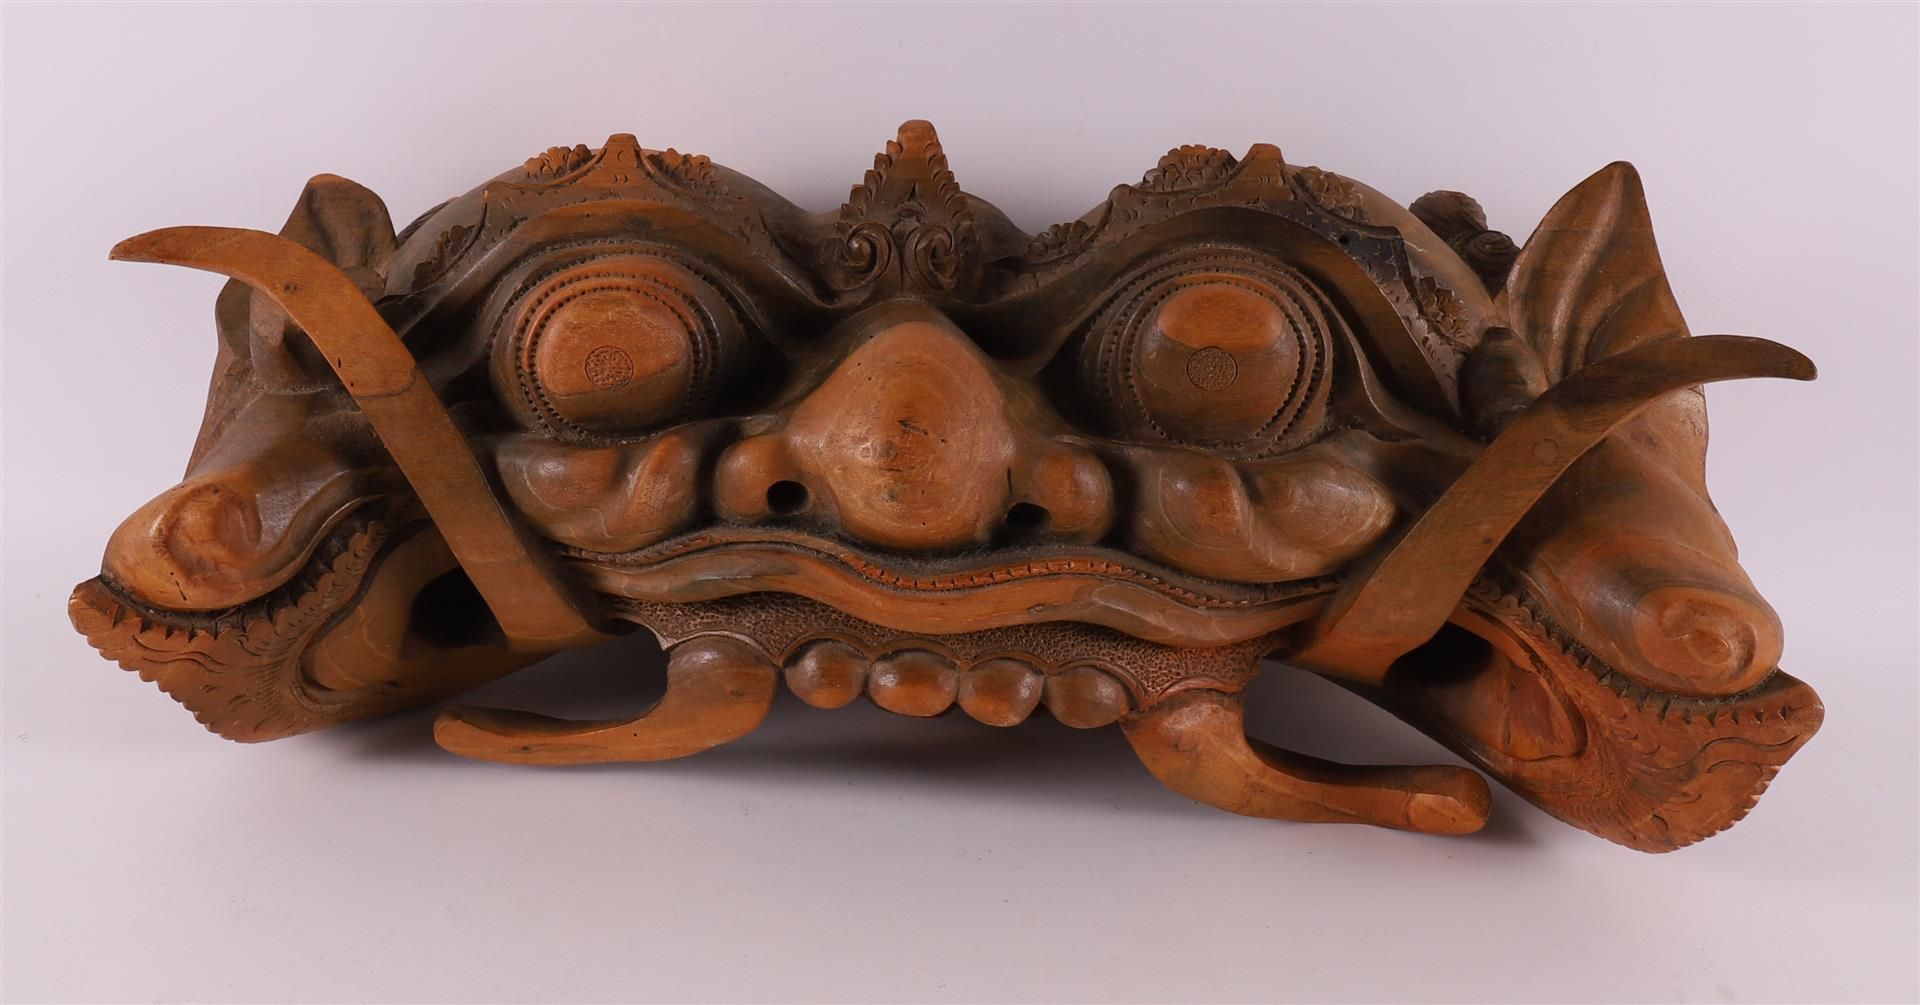 A carved wooden dragon head ornament, Indonesia, 20th century